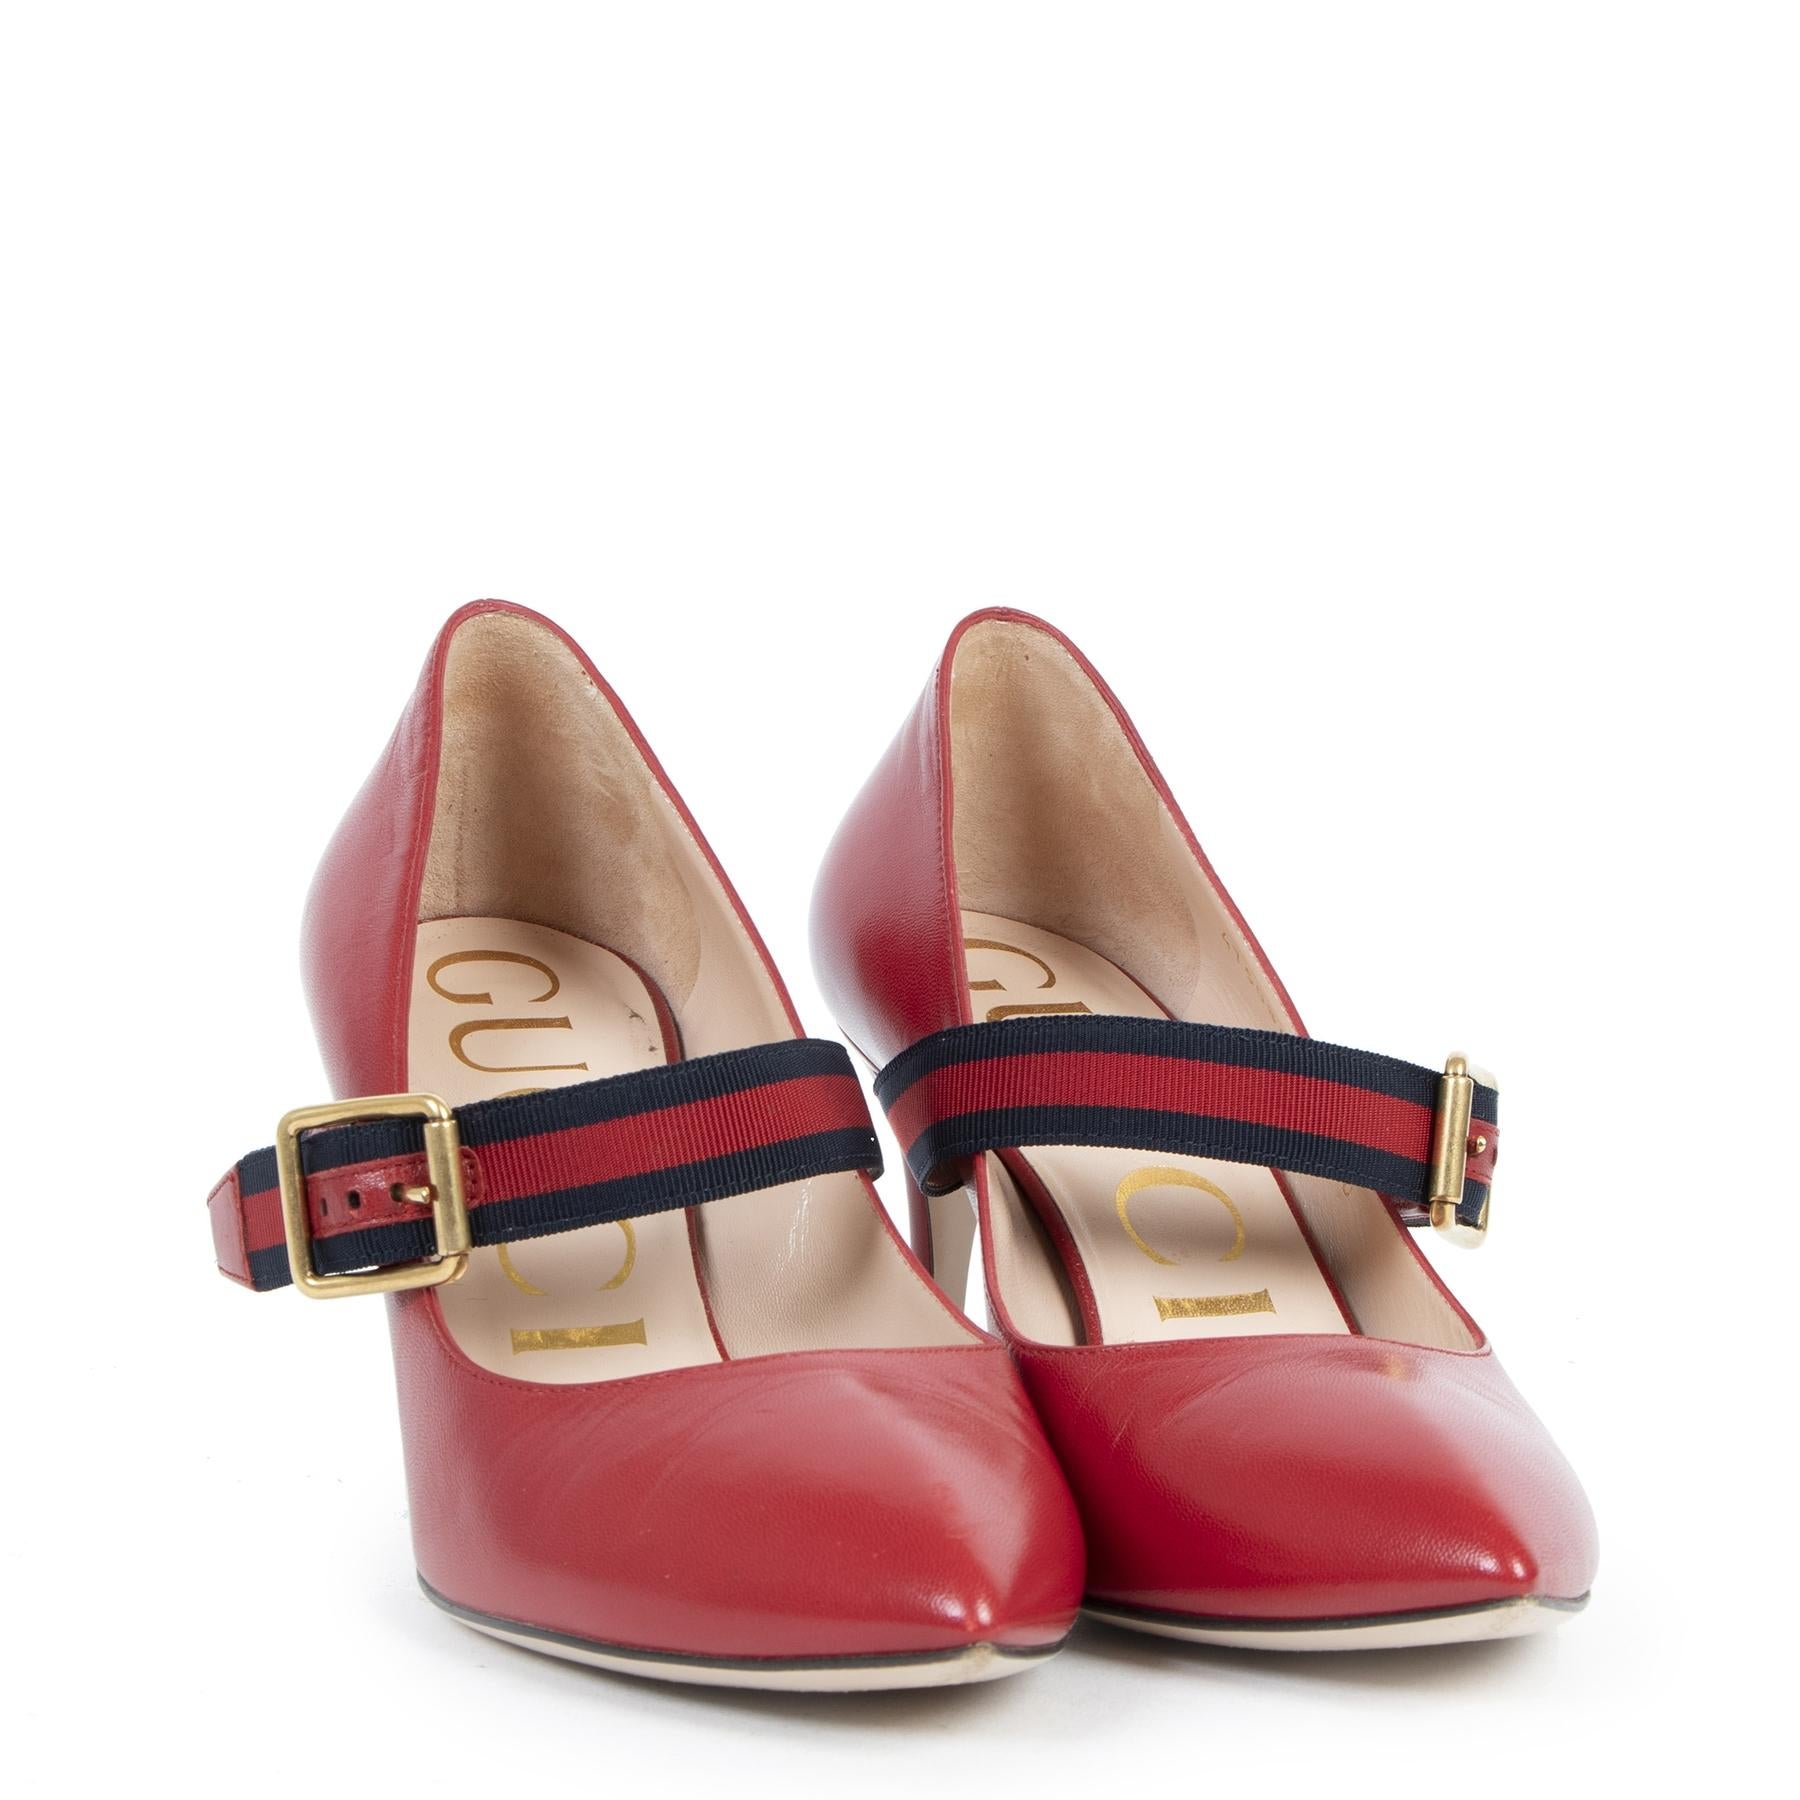 Good preloved condition

Gucci Red Sylvie Pumps - Size 36

Make a statement with these fabulous Gucci Sylvie pumps. The shoes are crafted in beautiful red leather and feature the iconic red and blue Web strap in fabric and a 6,5 cm heel. The strap